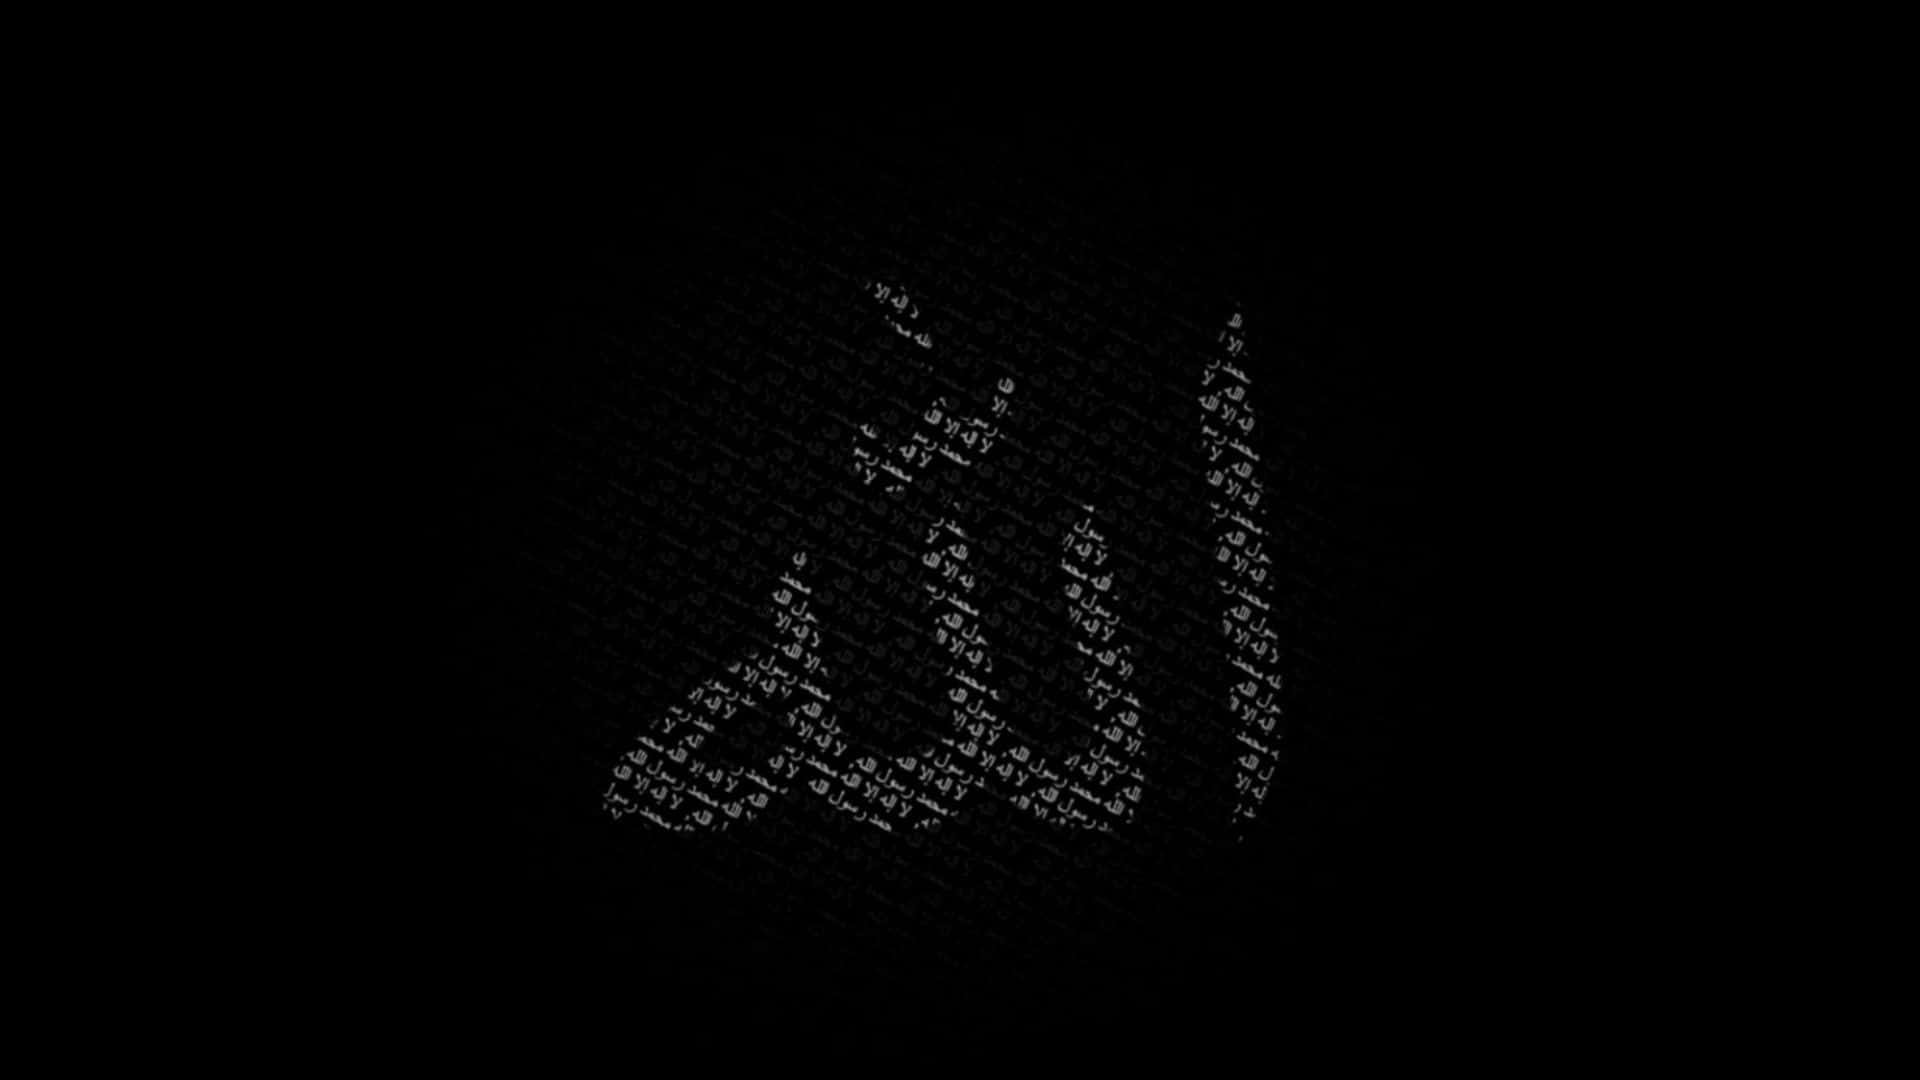 A Visual Representation of the Divine Name of Allah